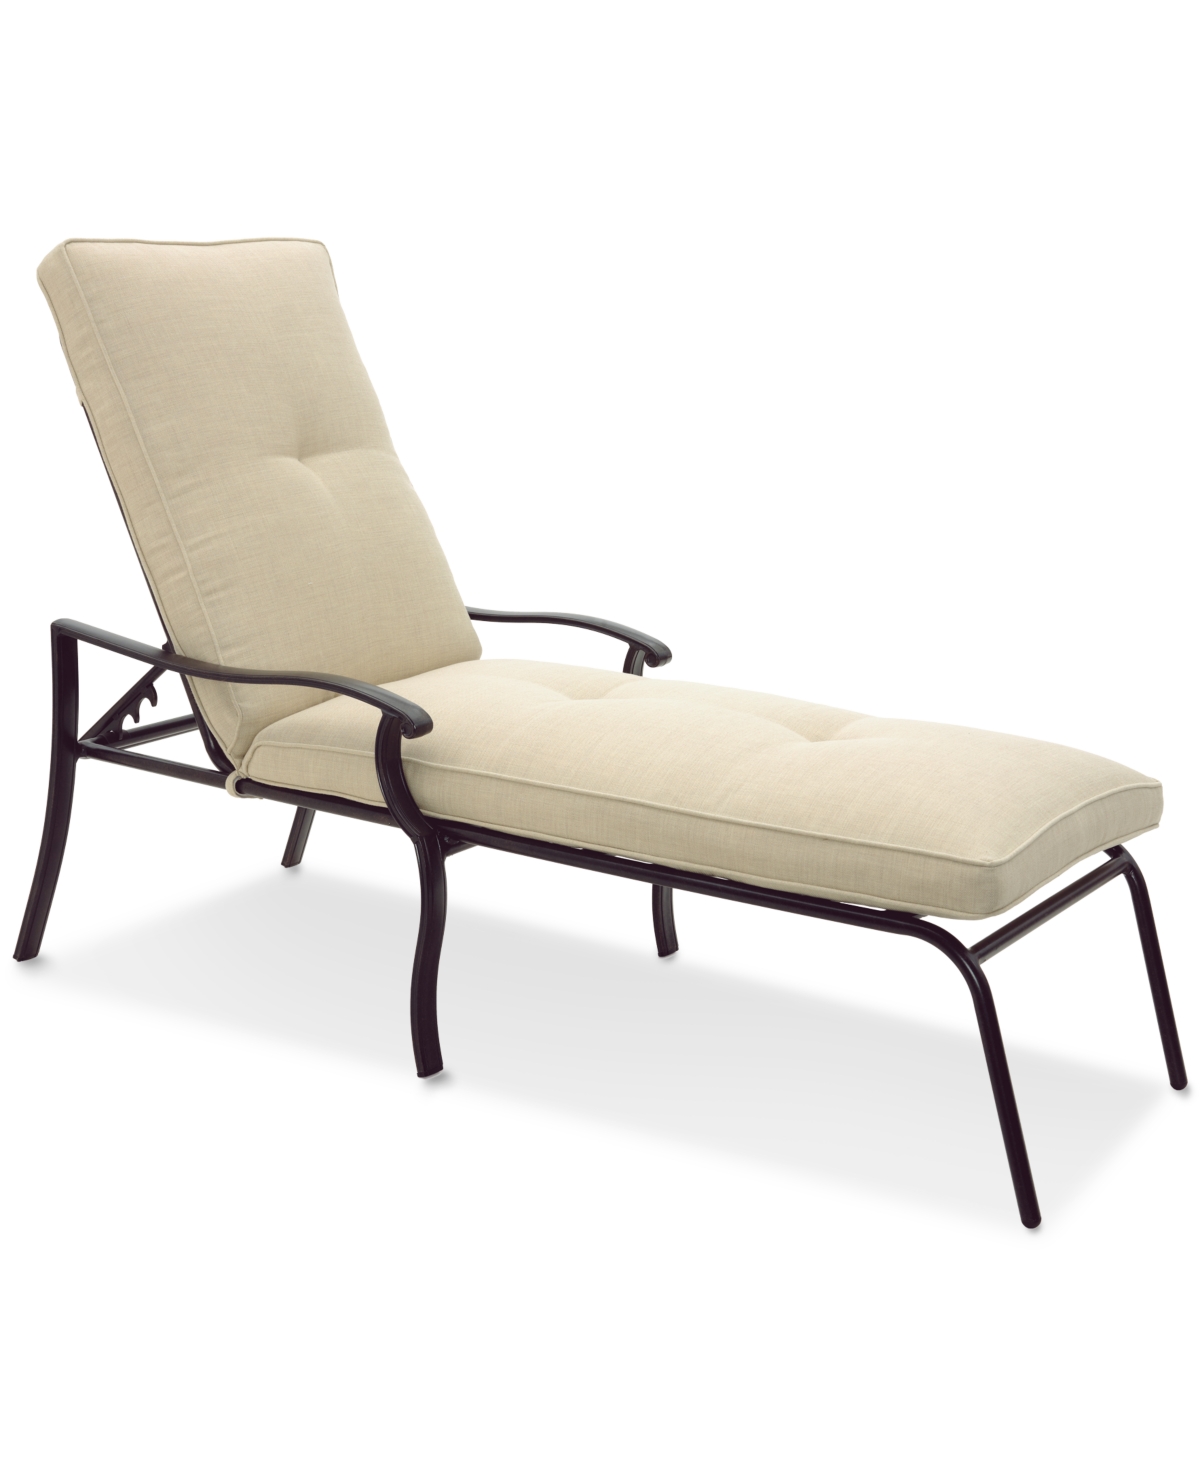 Agio Wythburn Mix And Match Lattice Outdoor Chaise Lounge In Straw Natural,pewter Finish